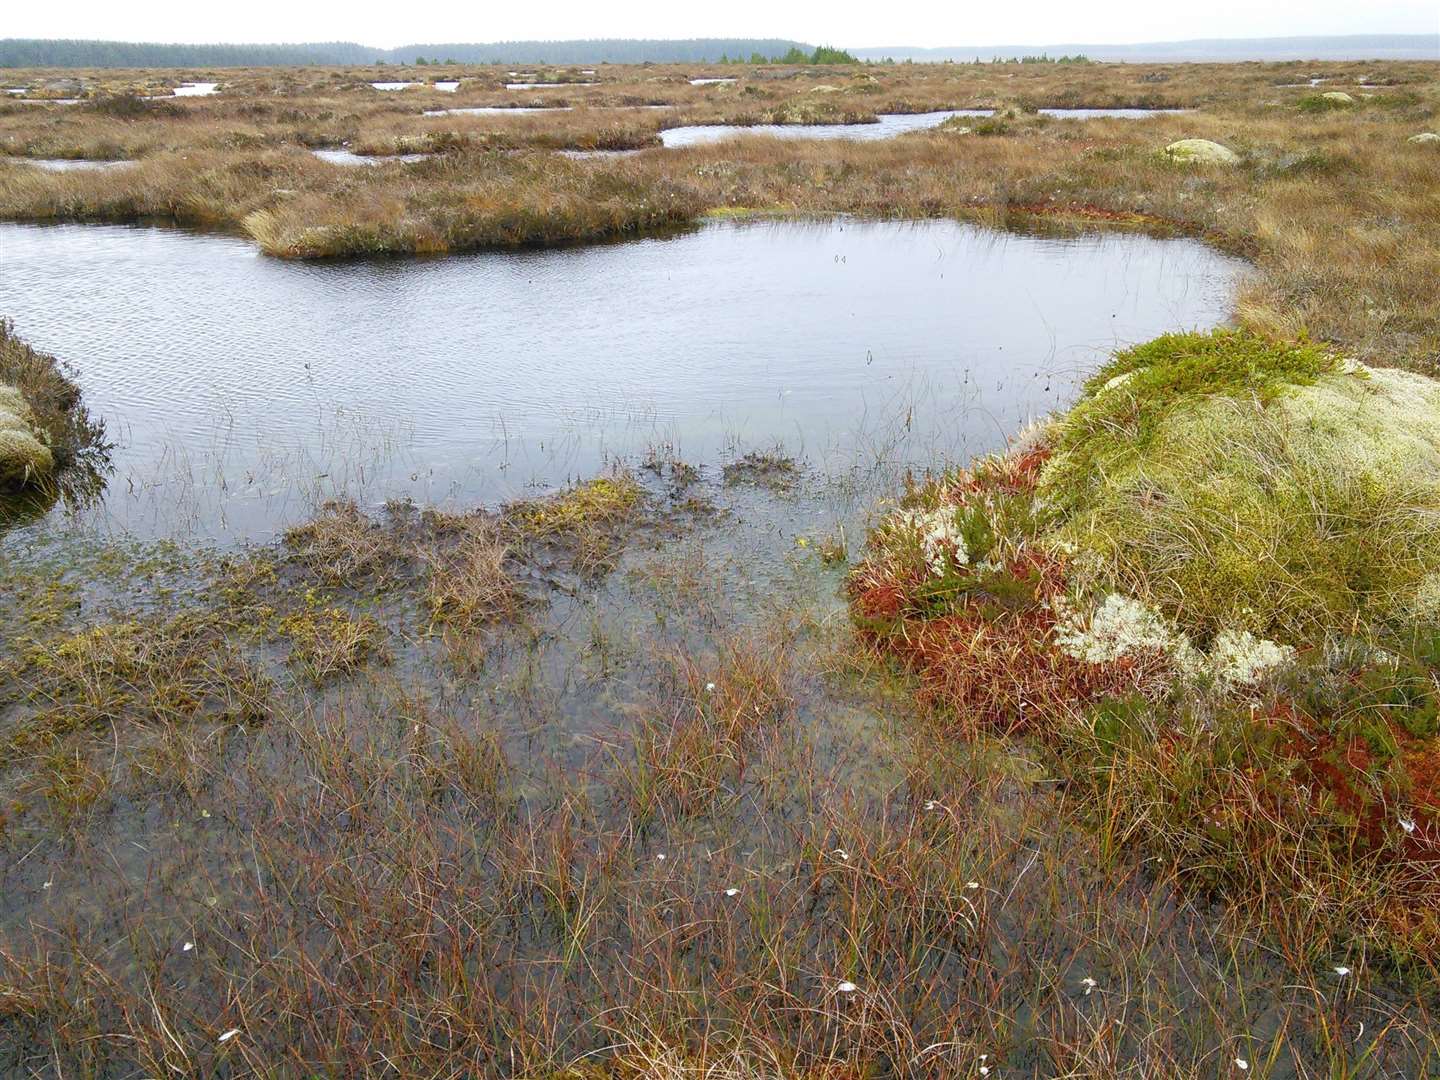 The proposal will see a further 2446 ha added to the Caithness and Sutherland Peatlands protected area.